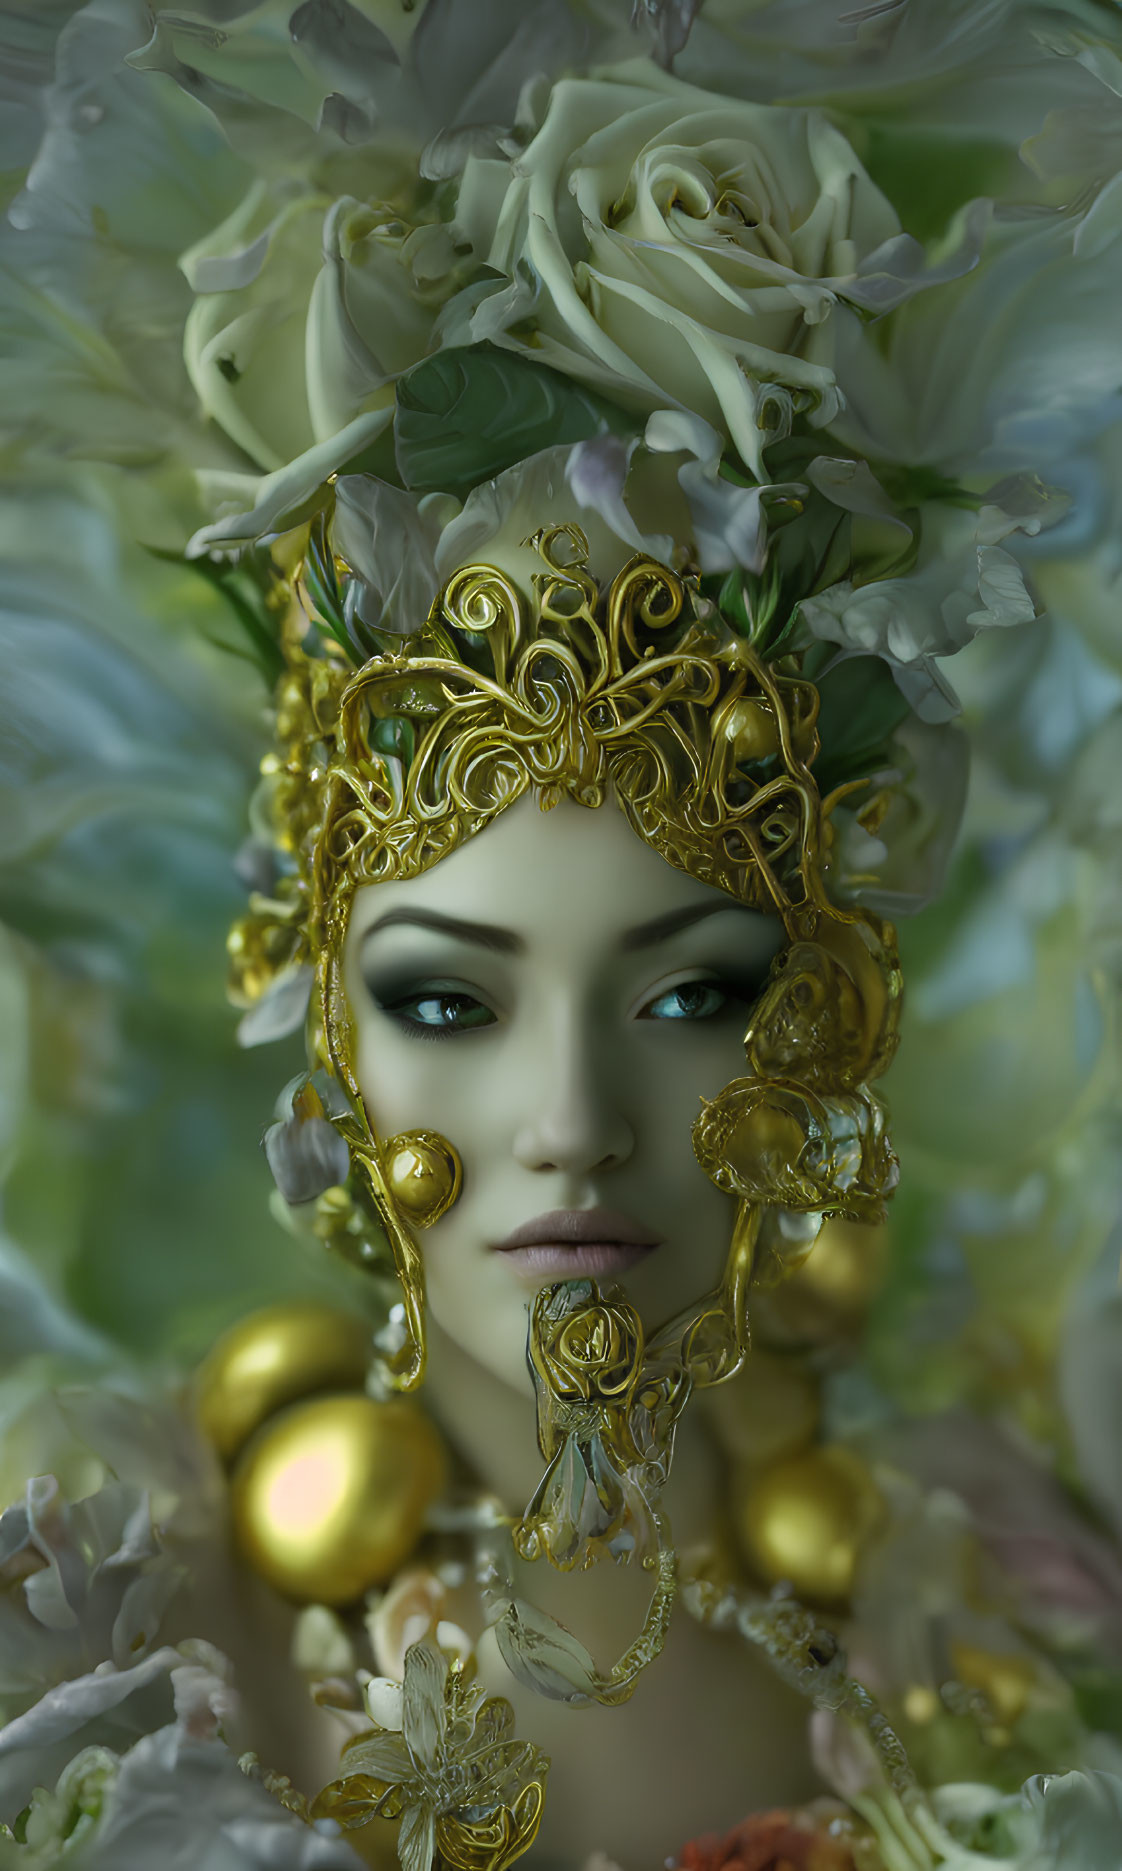 Person with ornate gold headdress and makeup against pale flower backdrop